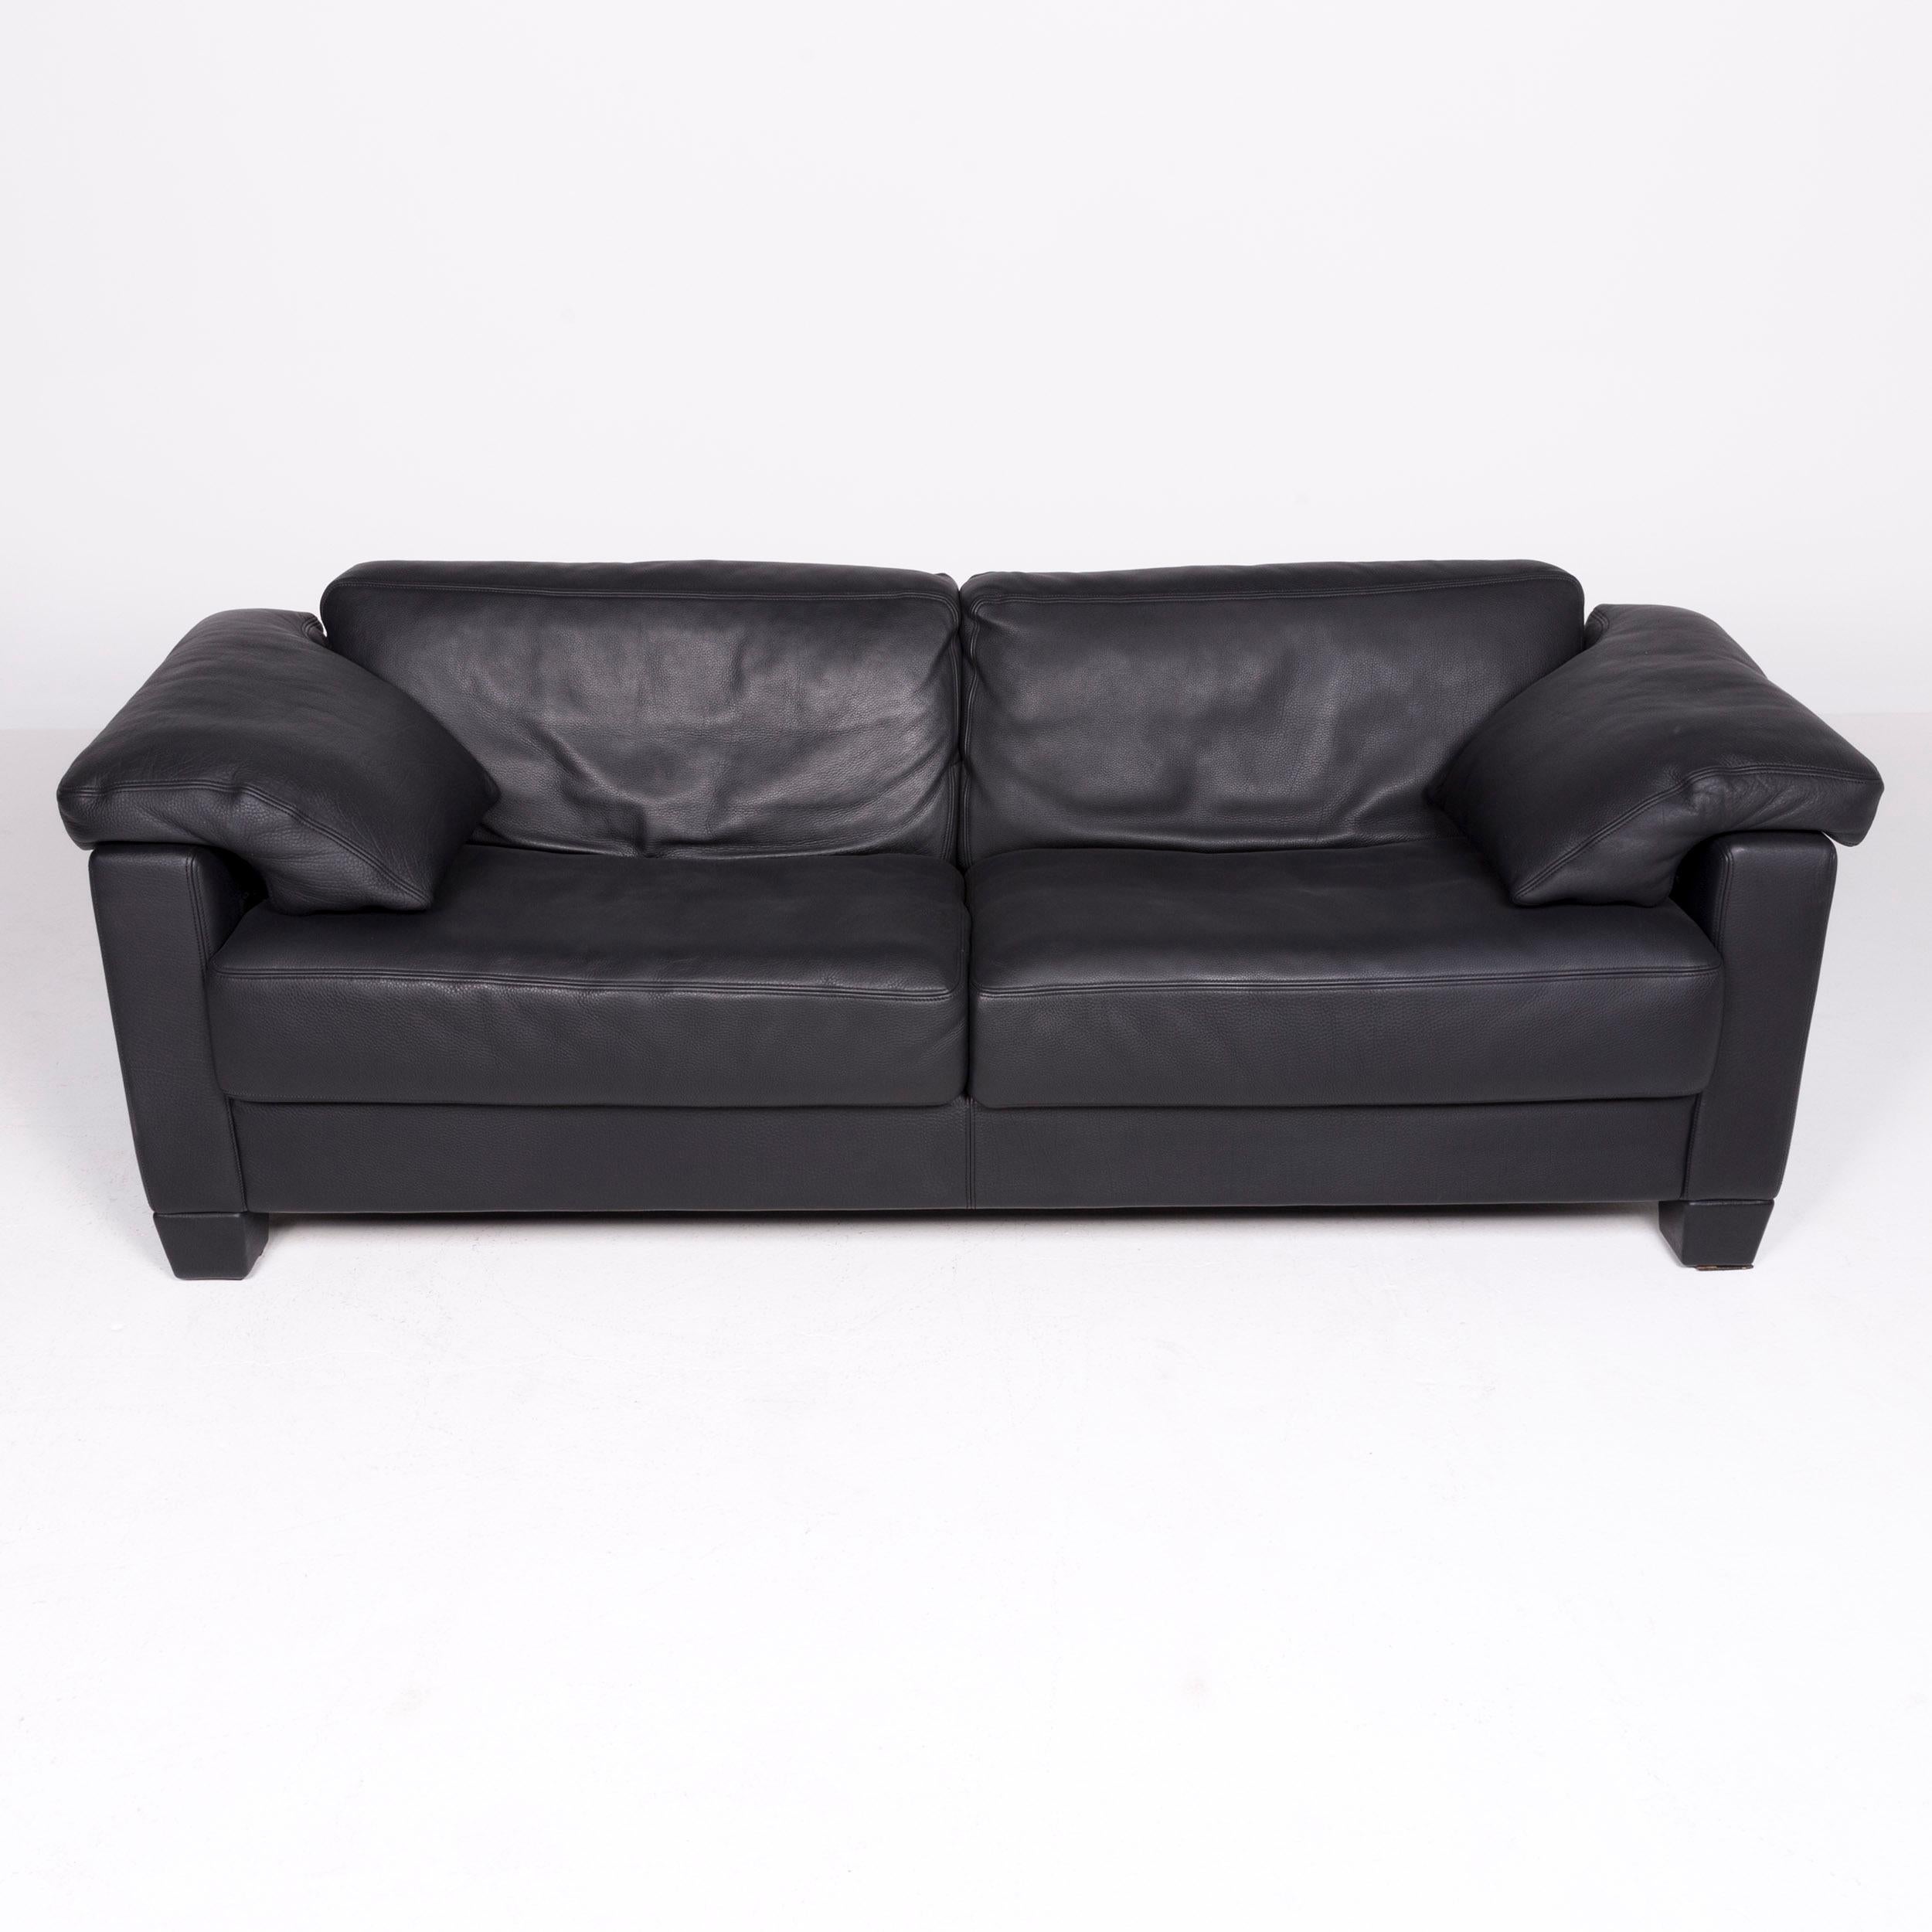 Contemporary De Sede DS 17 Designer Leather Sofa Black Genuine Leather Two-Seat Couch For Sale